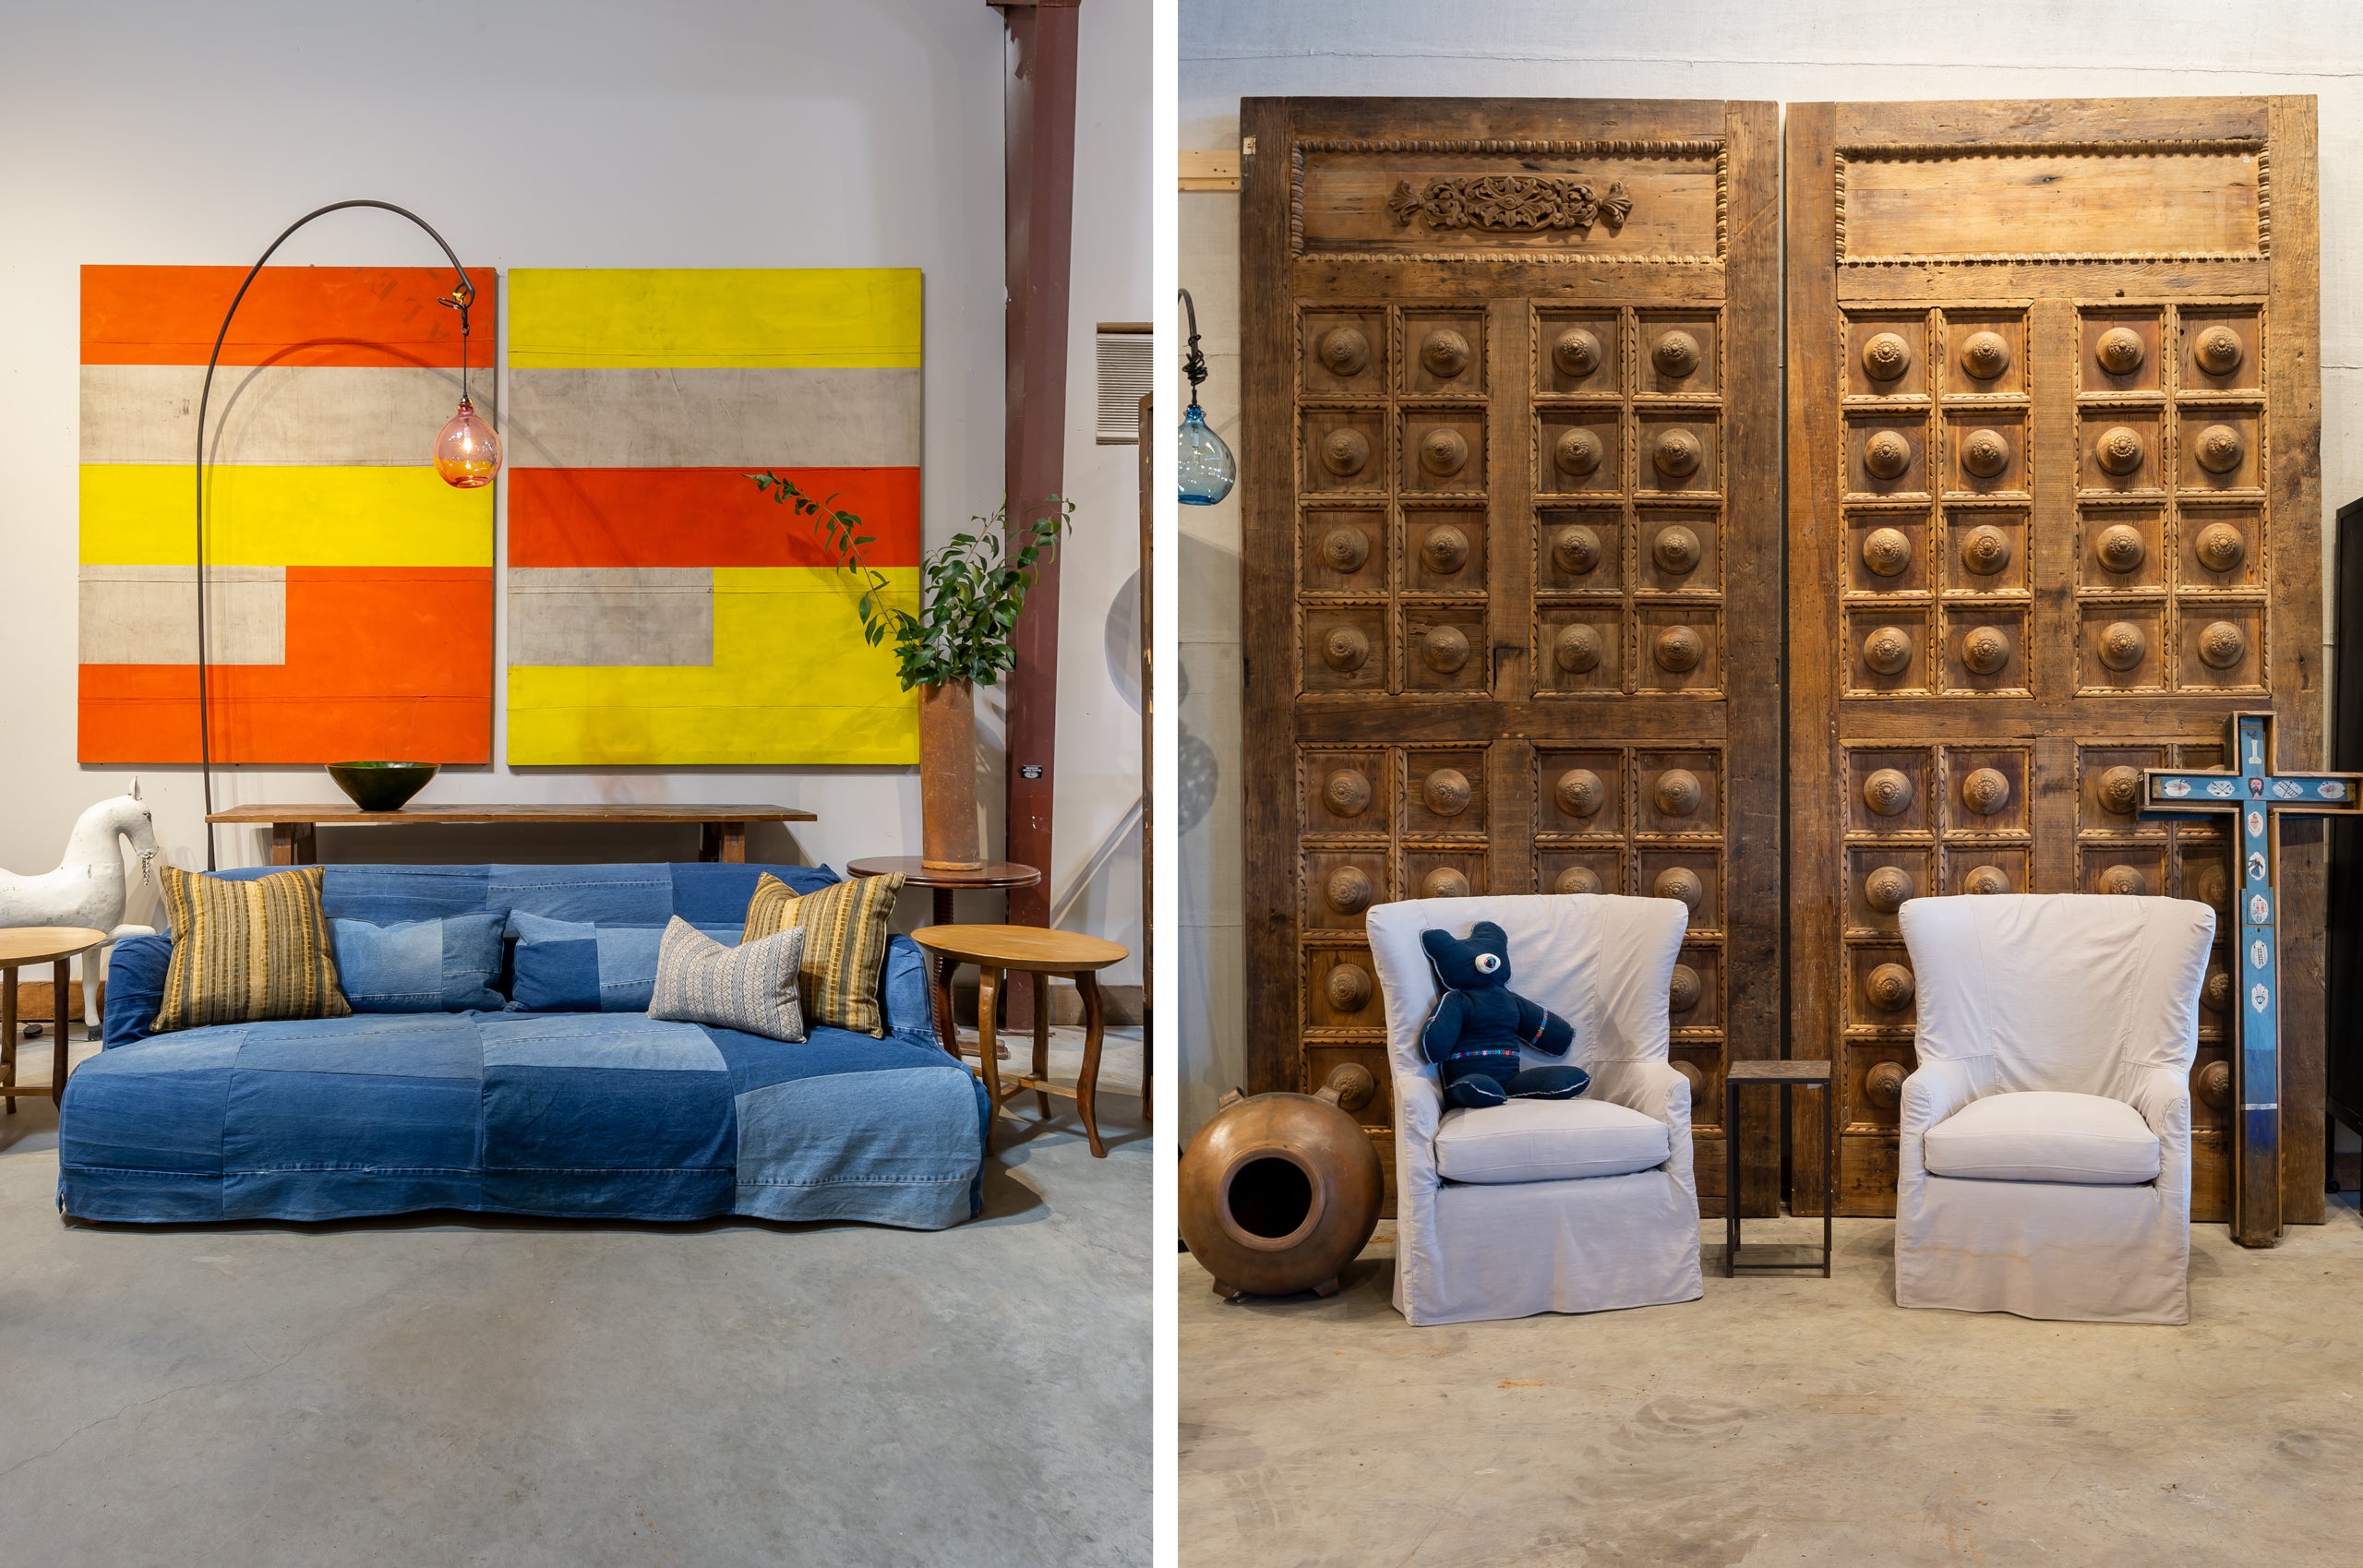 Two vertical images side by side. Left image is a demin upholstered bed. Right image of two white chairs in front of large vintage wooden doors